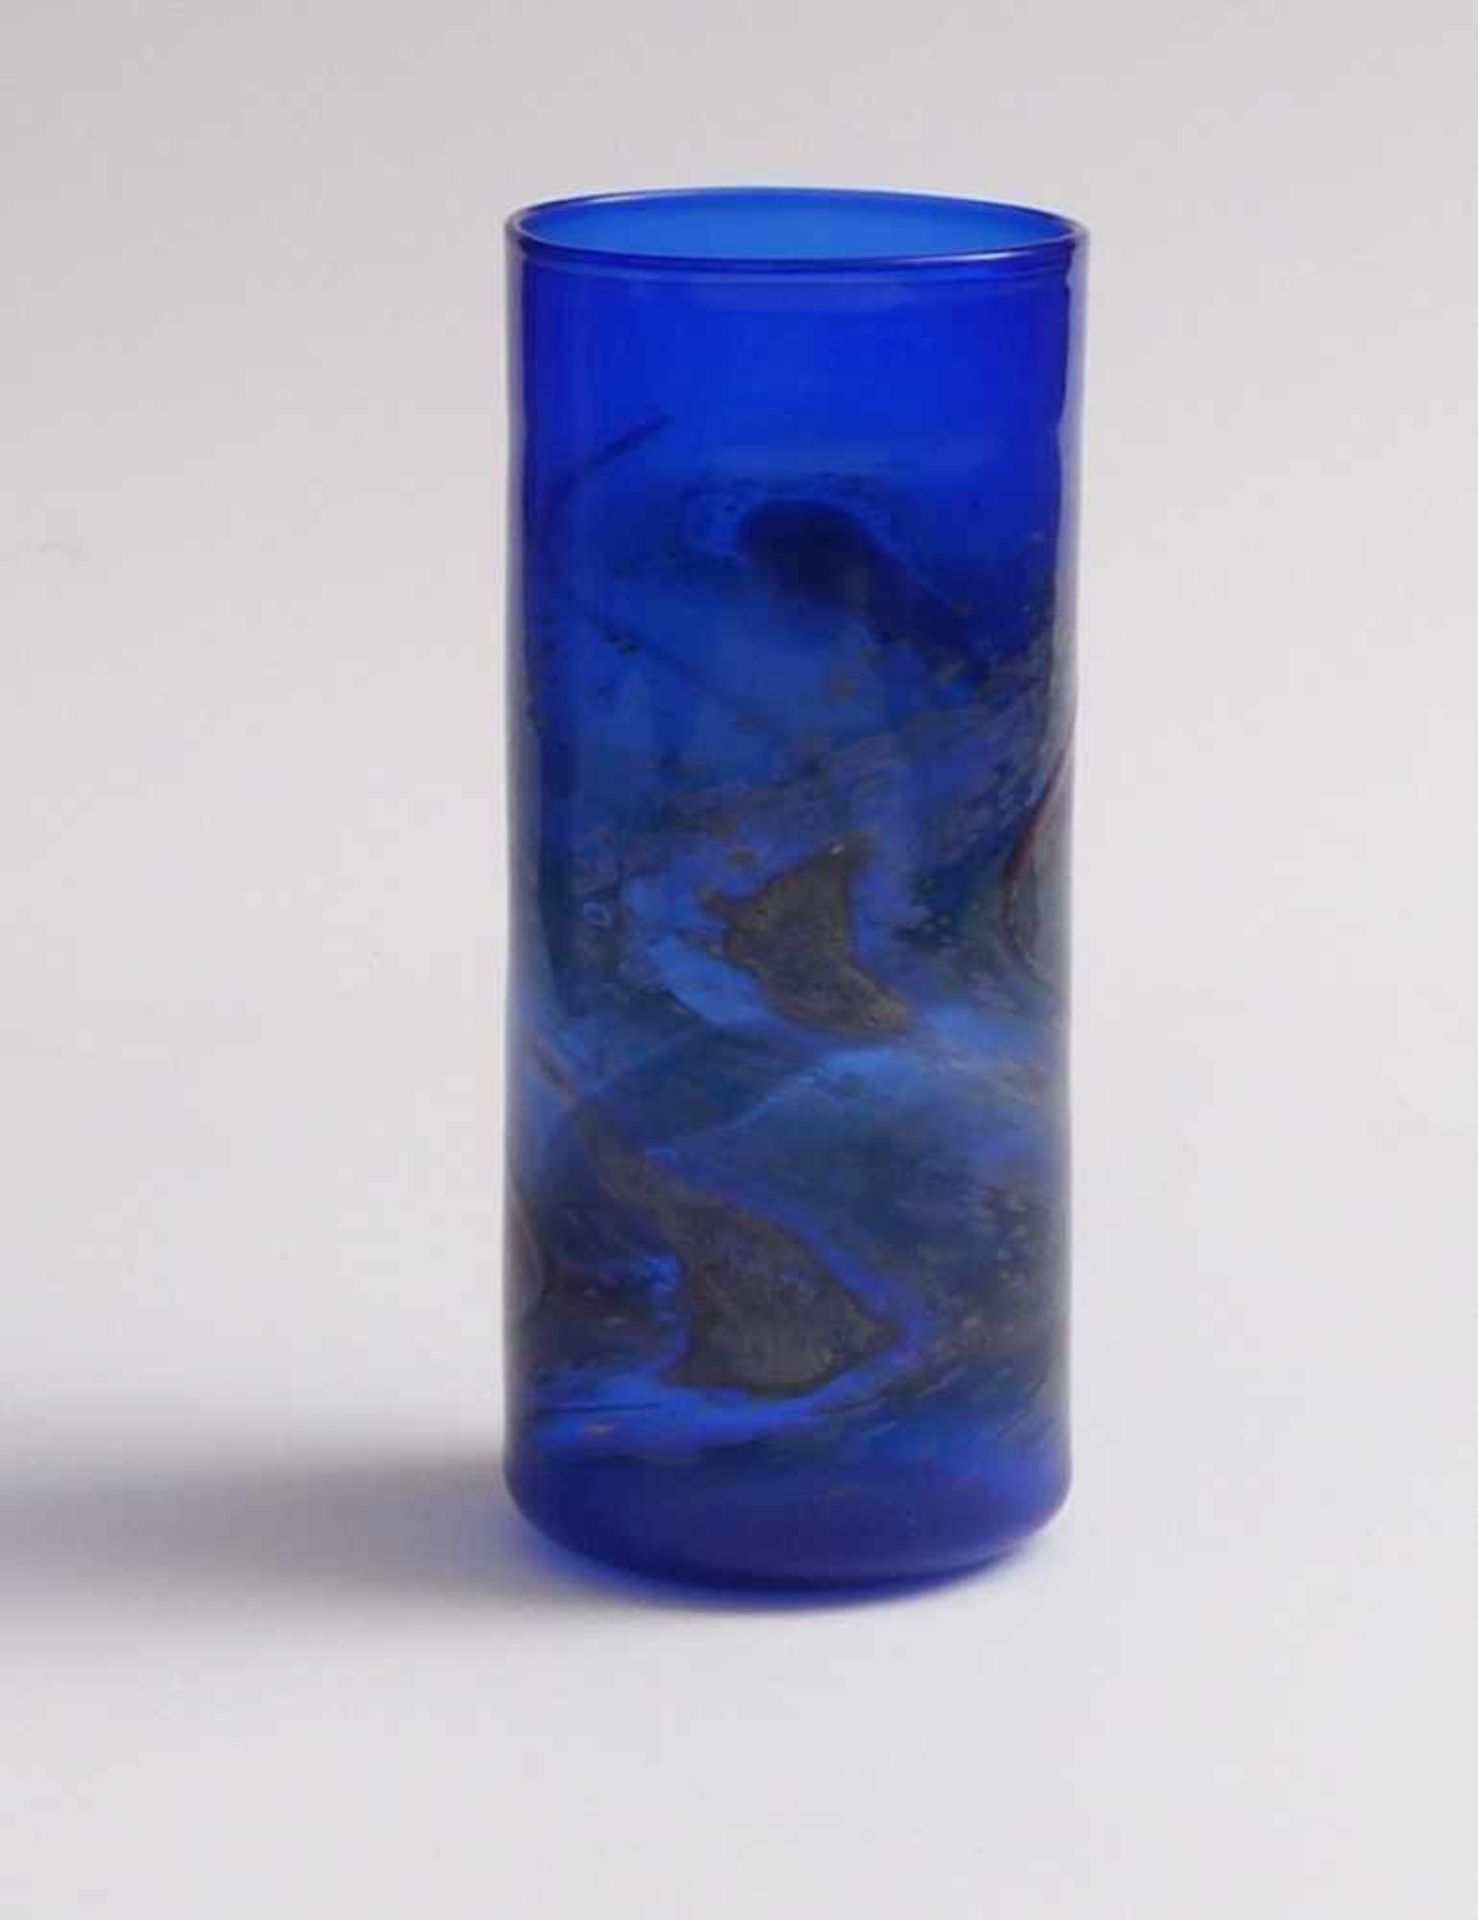 Bäz-Dölle, WalterSmall vase(Lauscha 1935 born) Blue glass, wavy inclusions in brown and metal oxide.